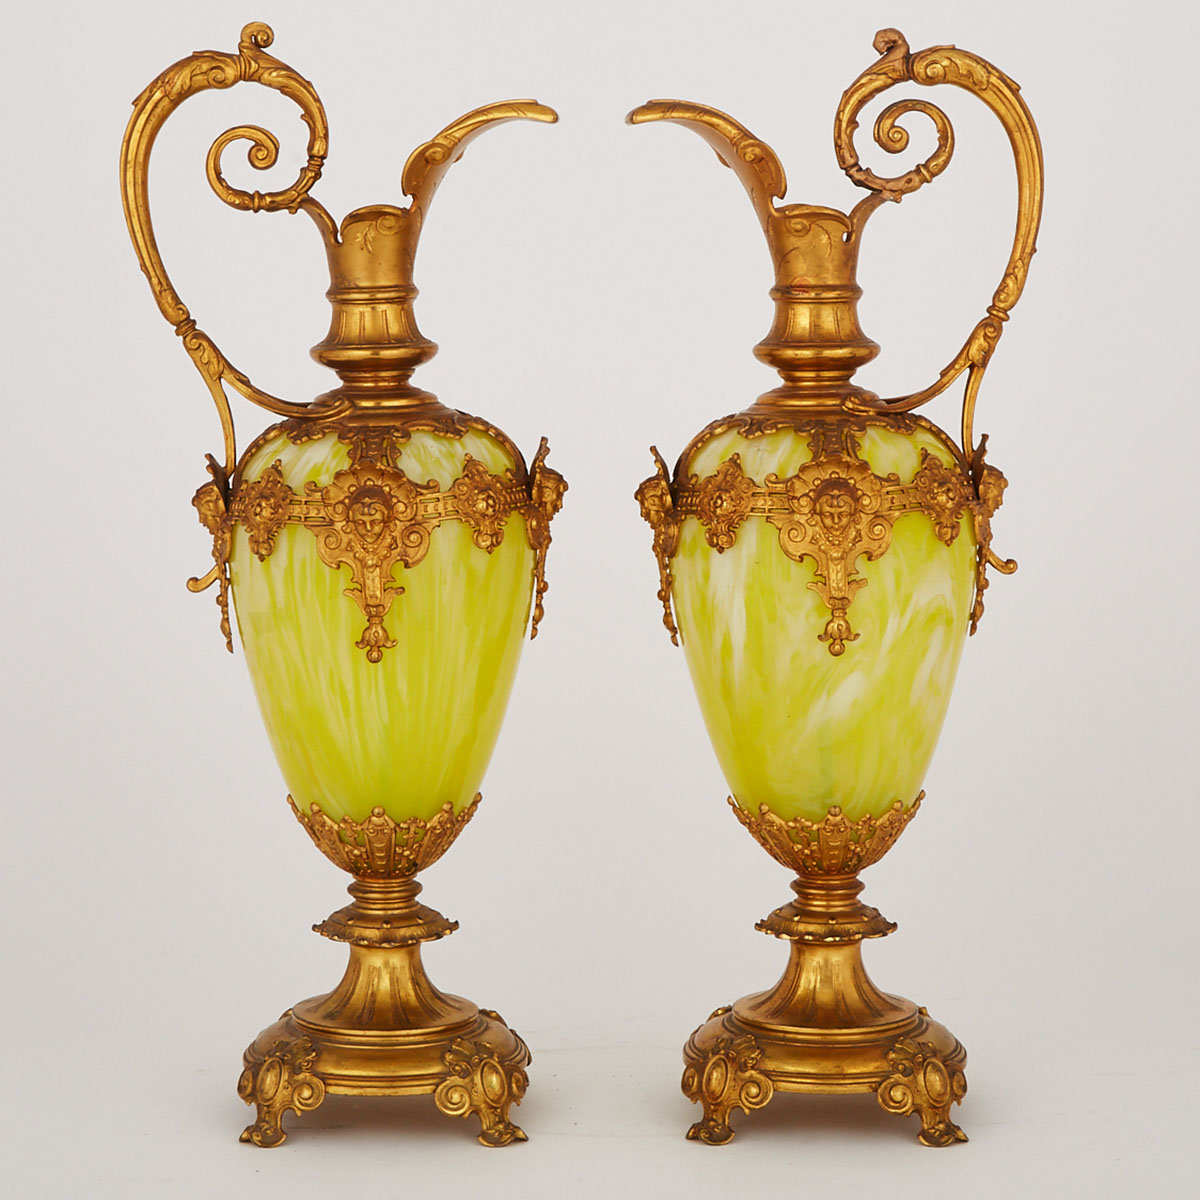 Pair of Aesthetic Movement GIlt Bronze and Mottled Yellow Glass Ewers, c.1870